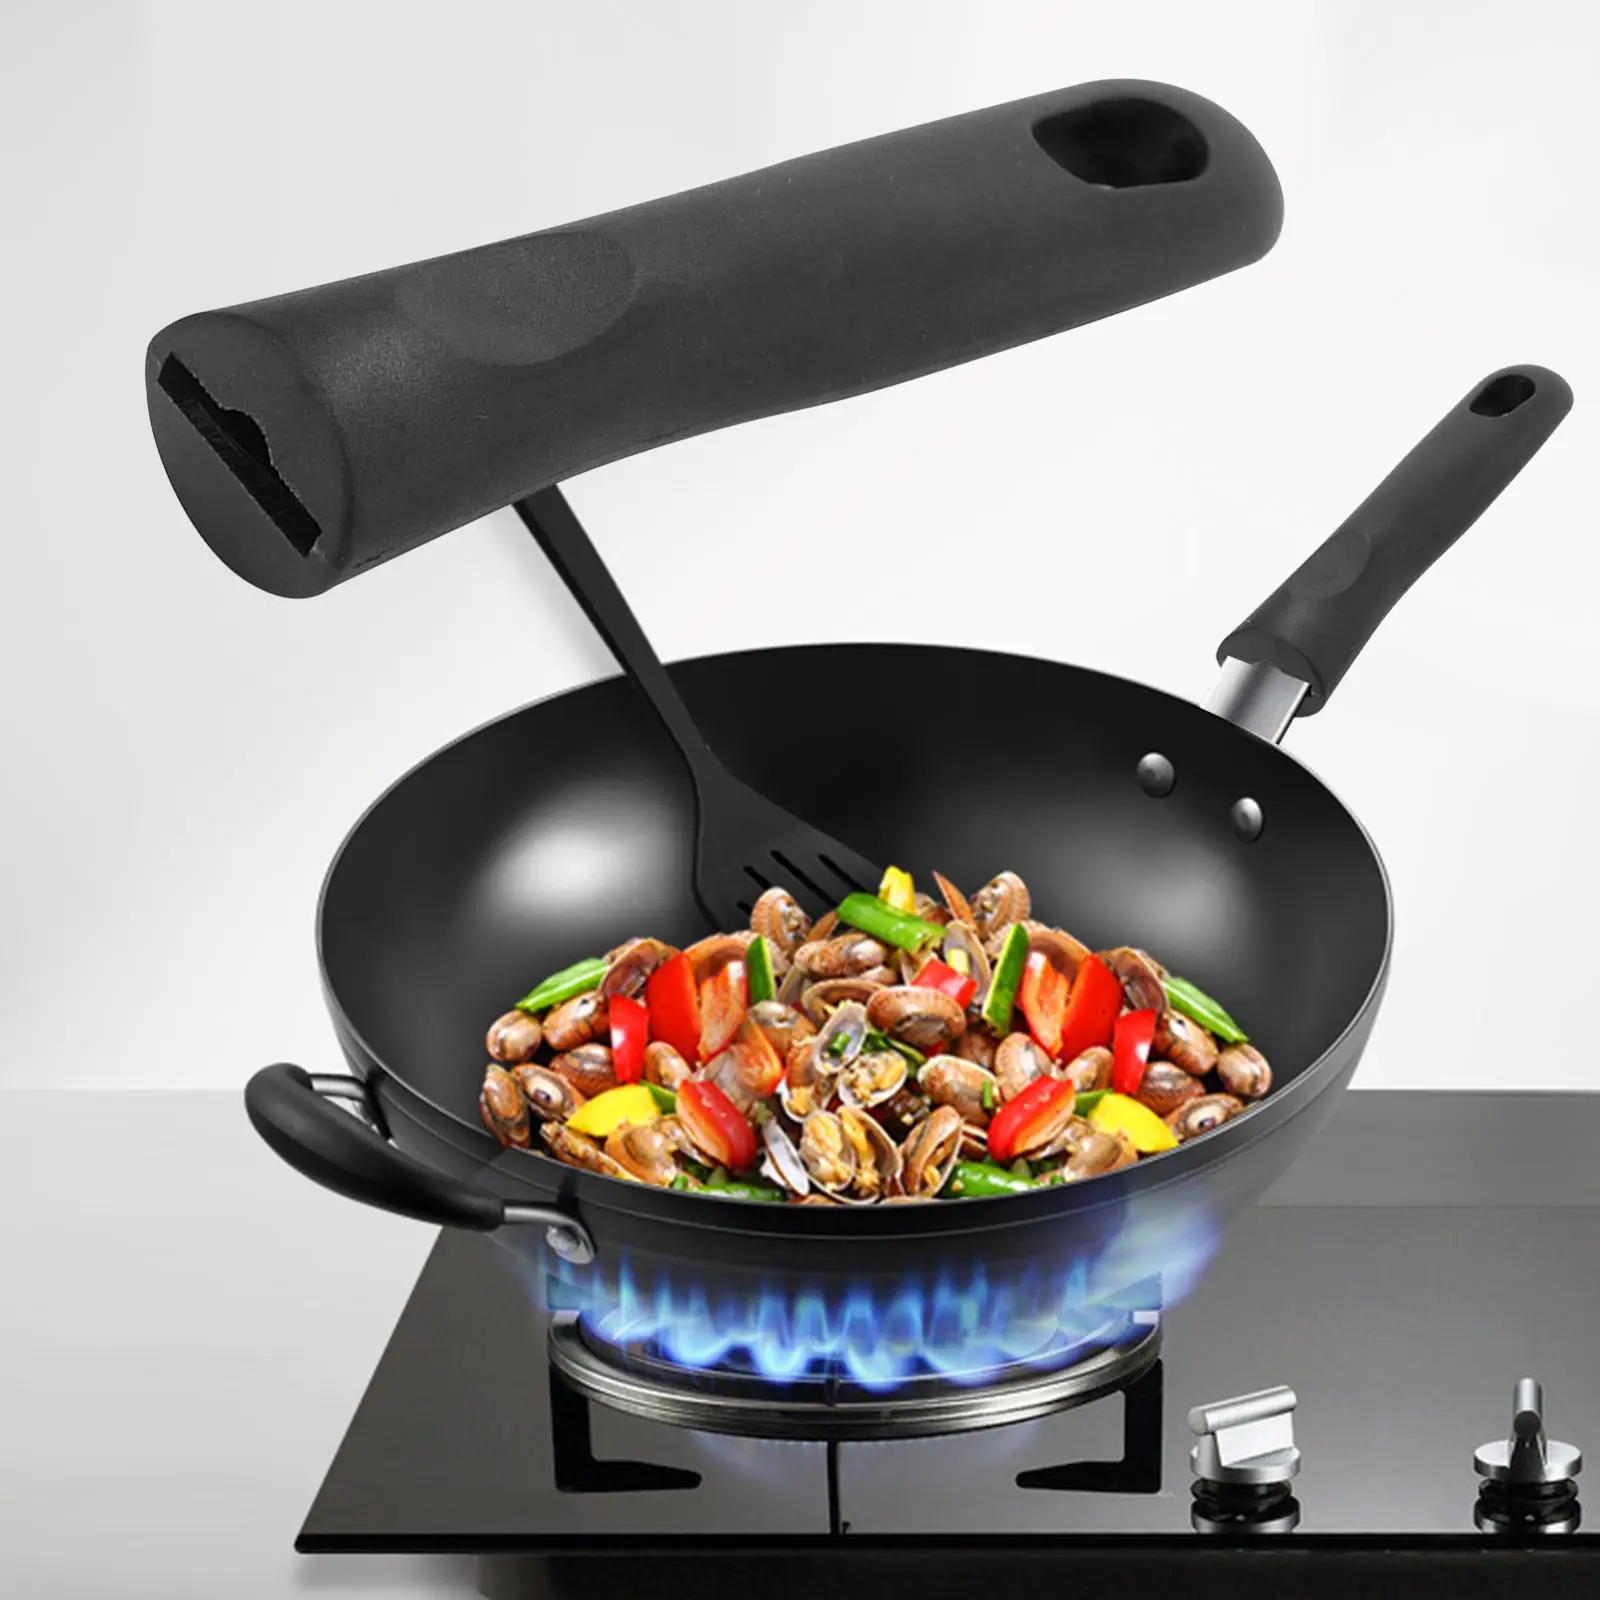 Practical Wok Handle Scaldproof Pan Handle for Home Cooking Accessories